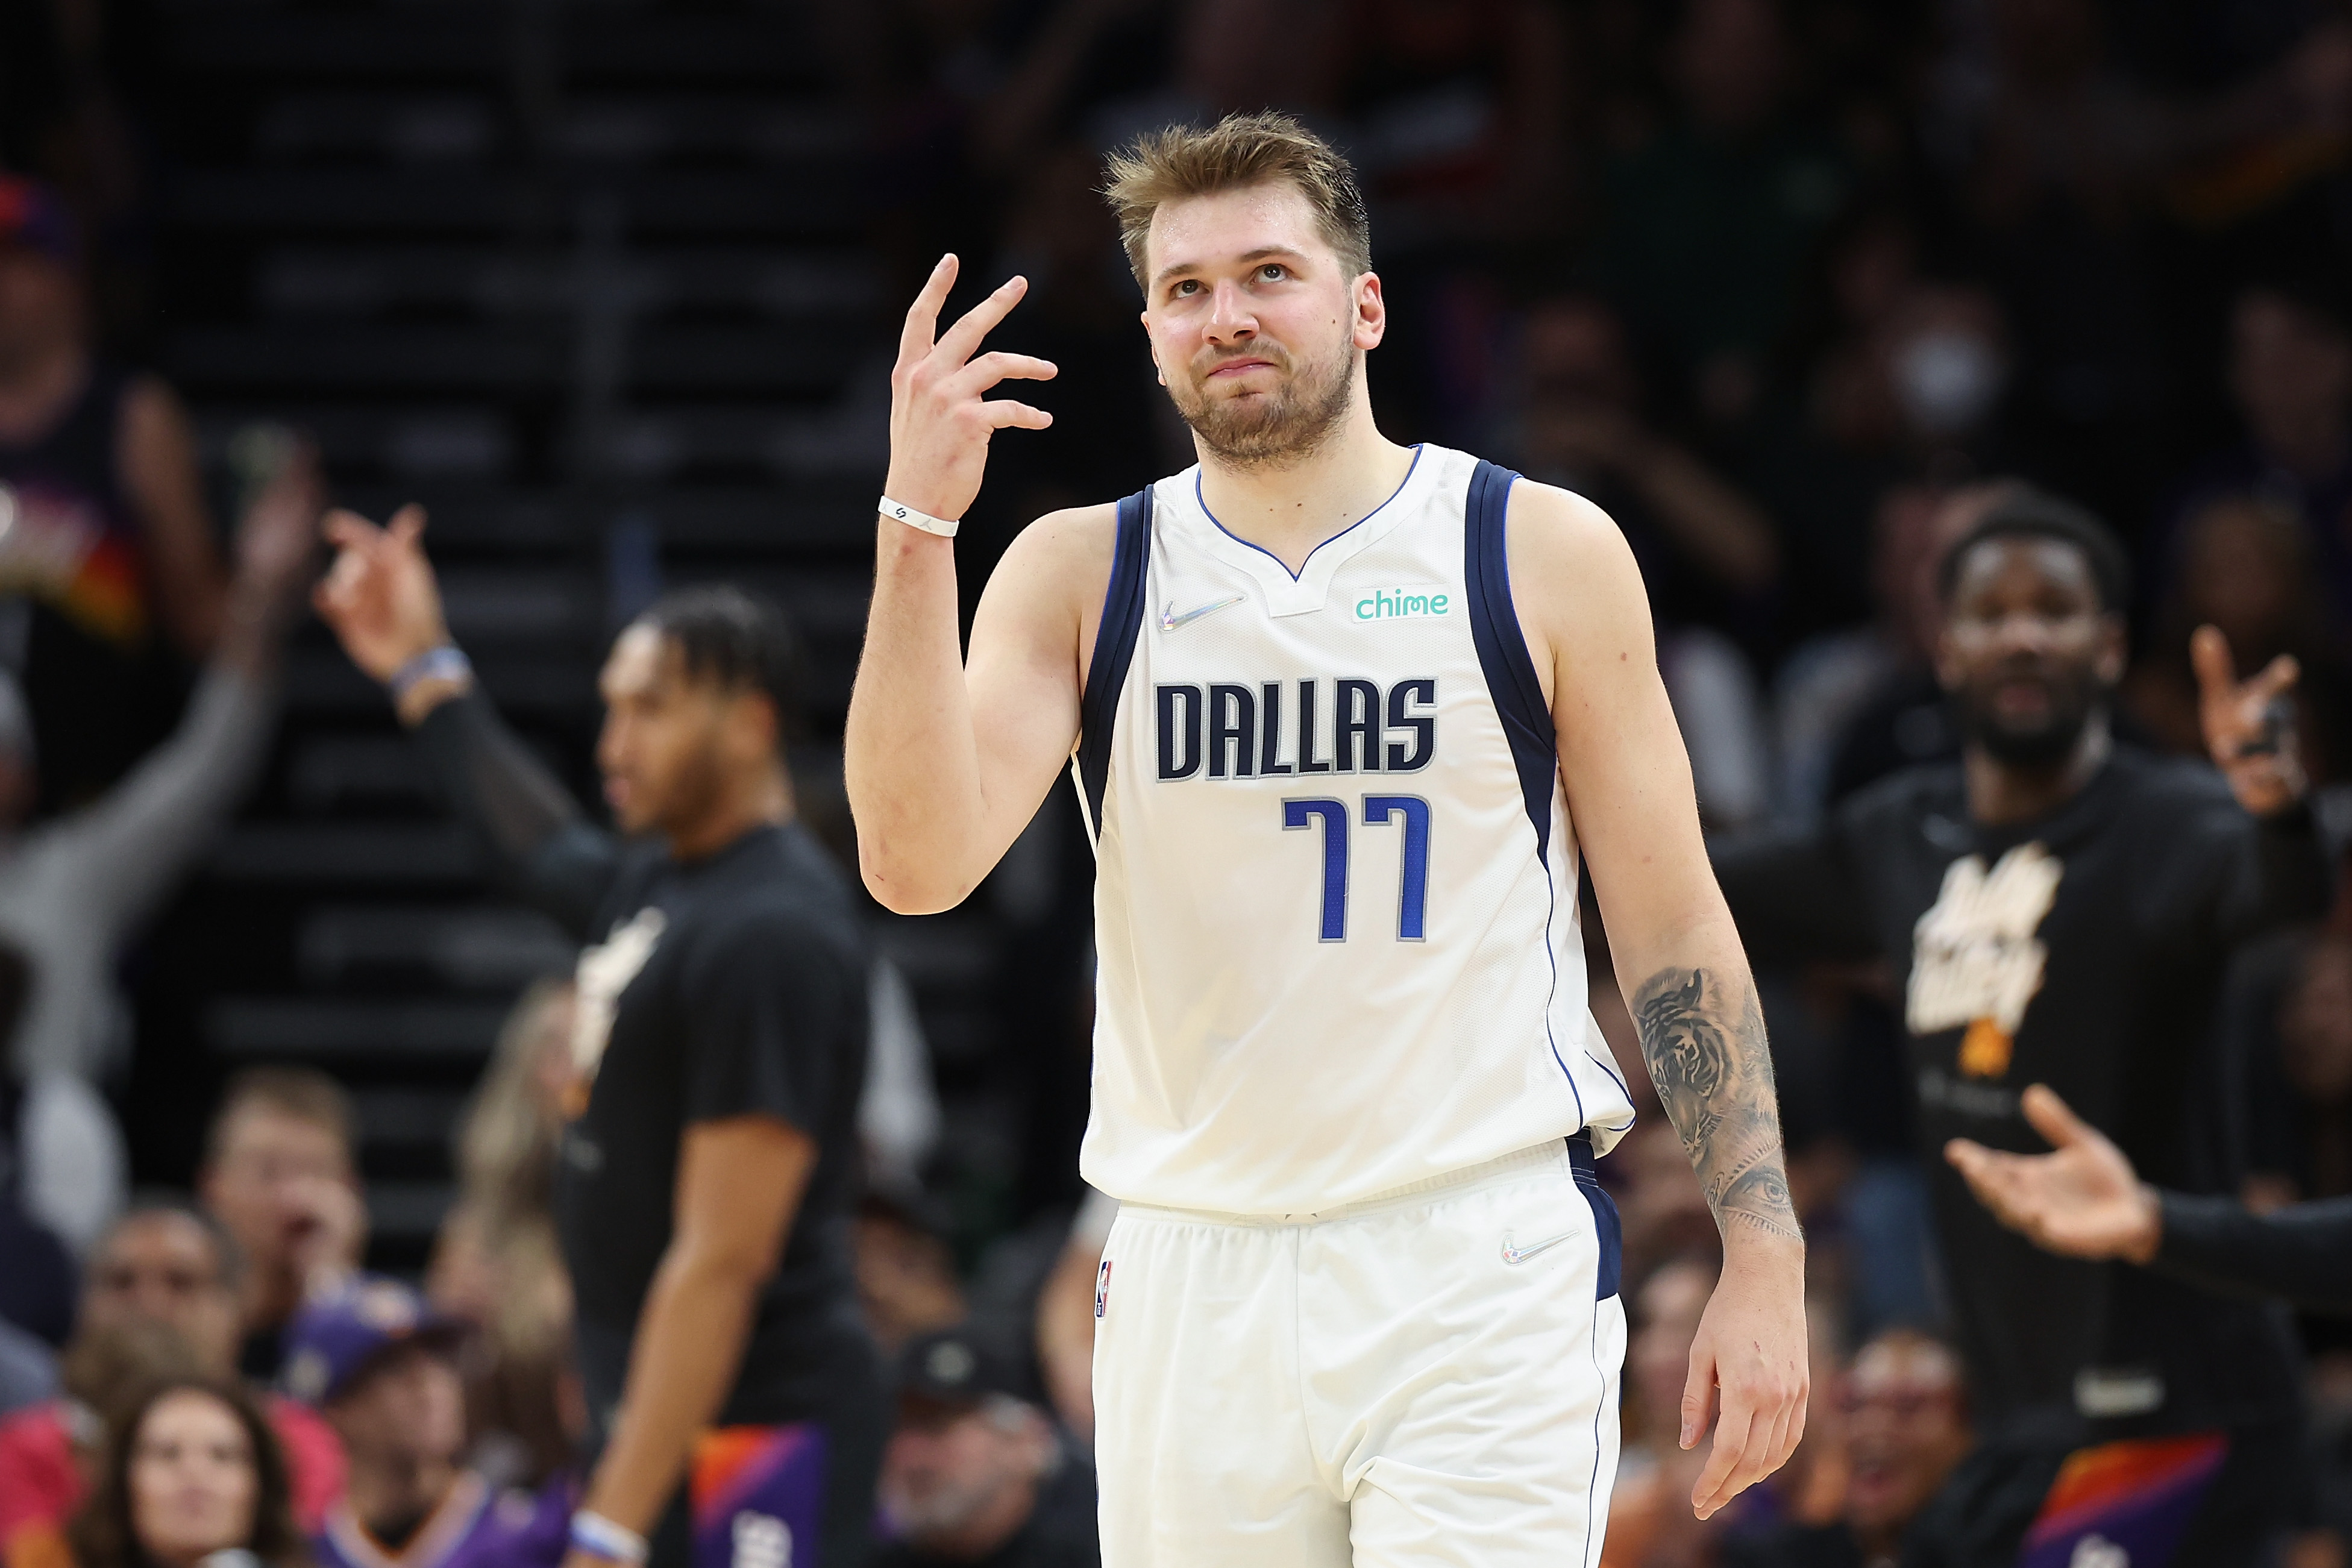 Dallas Mavericks superstar Luka Doncic against the Phoenix Suns in the NBA Playoffs in May 2022